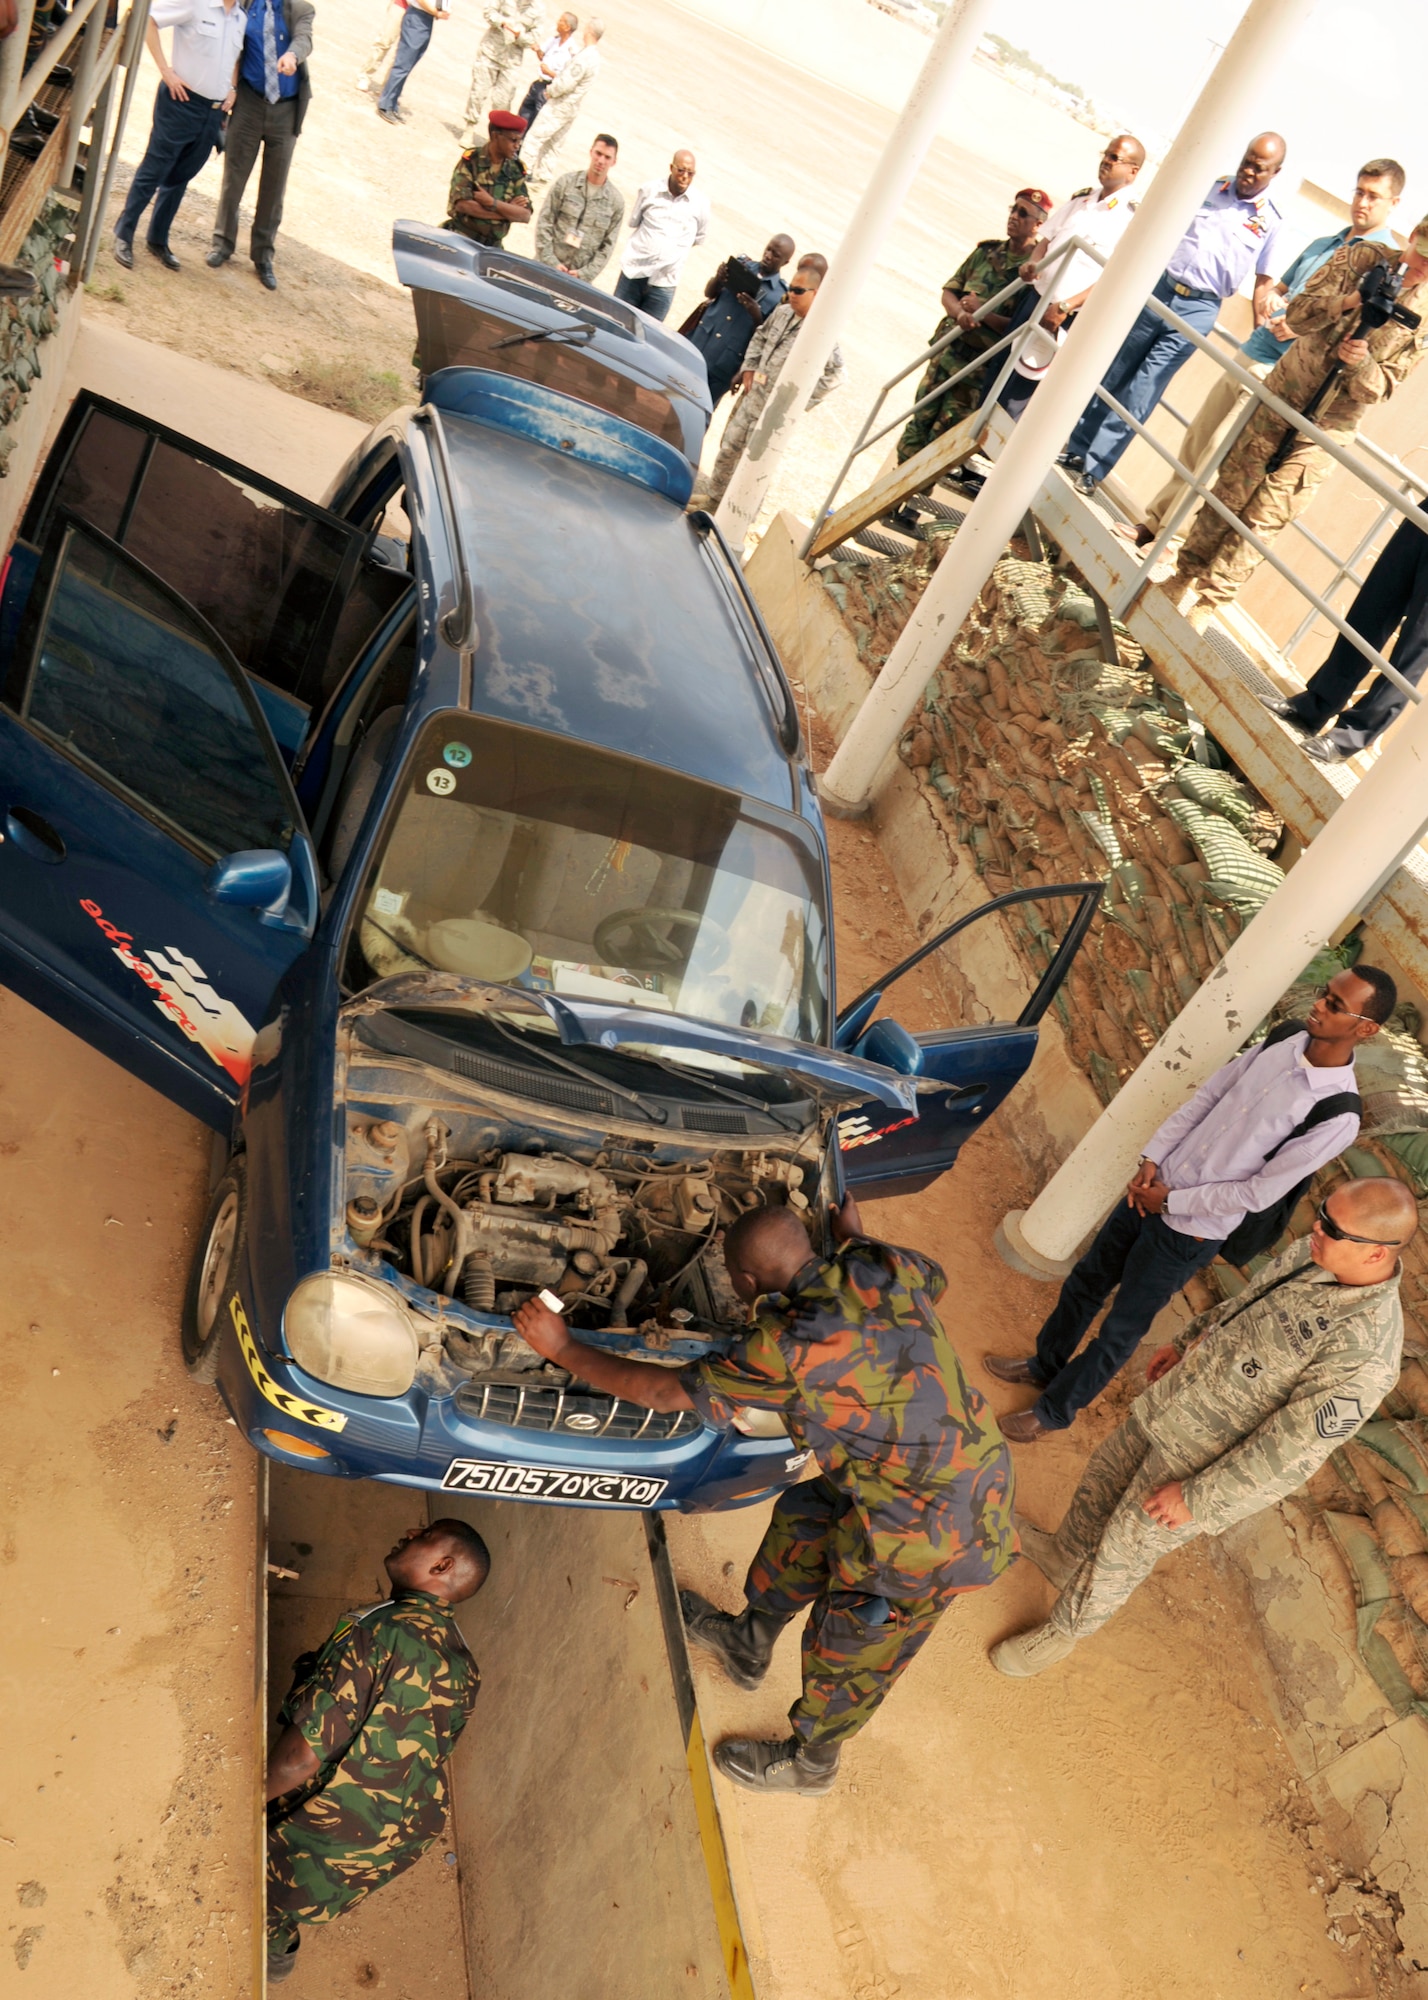 Kenya and Tanzania air force members conduct a vehicle inspection as part of an installation security knowledge exchange during African Partnership Flight???Djibouti at Djibouti Air Base, Feb. 10, 2015.  African Partnership Flight is the premiere program to bring together partner nations to increase cooperation and interoperability, which fosters stability and security throughout the continent. (U.S. Air Force Photo by Tech. Sgt. Ian Dean)